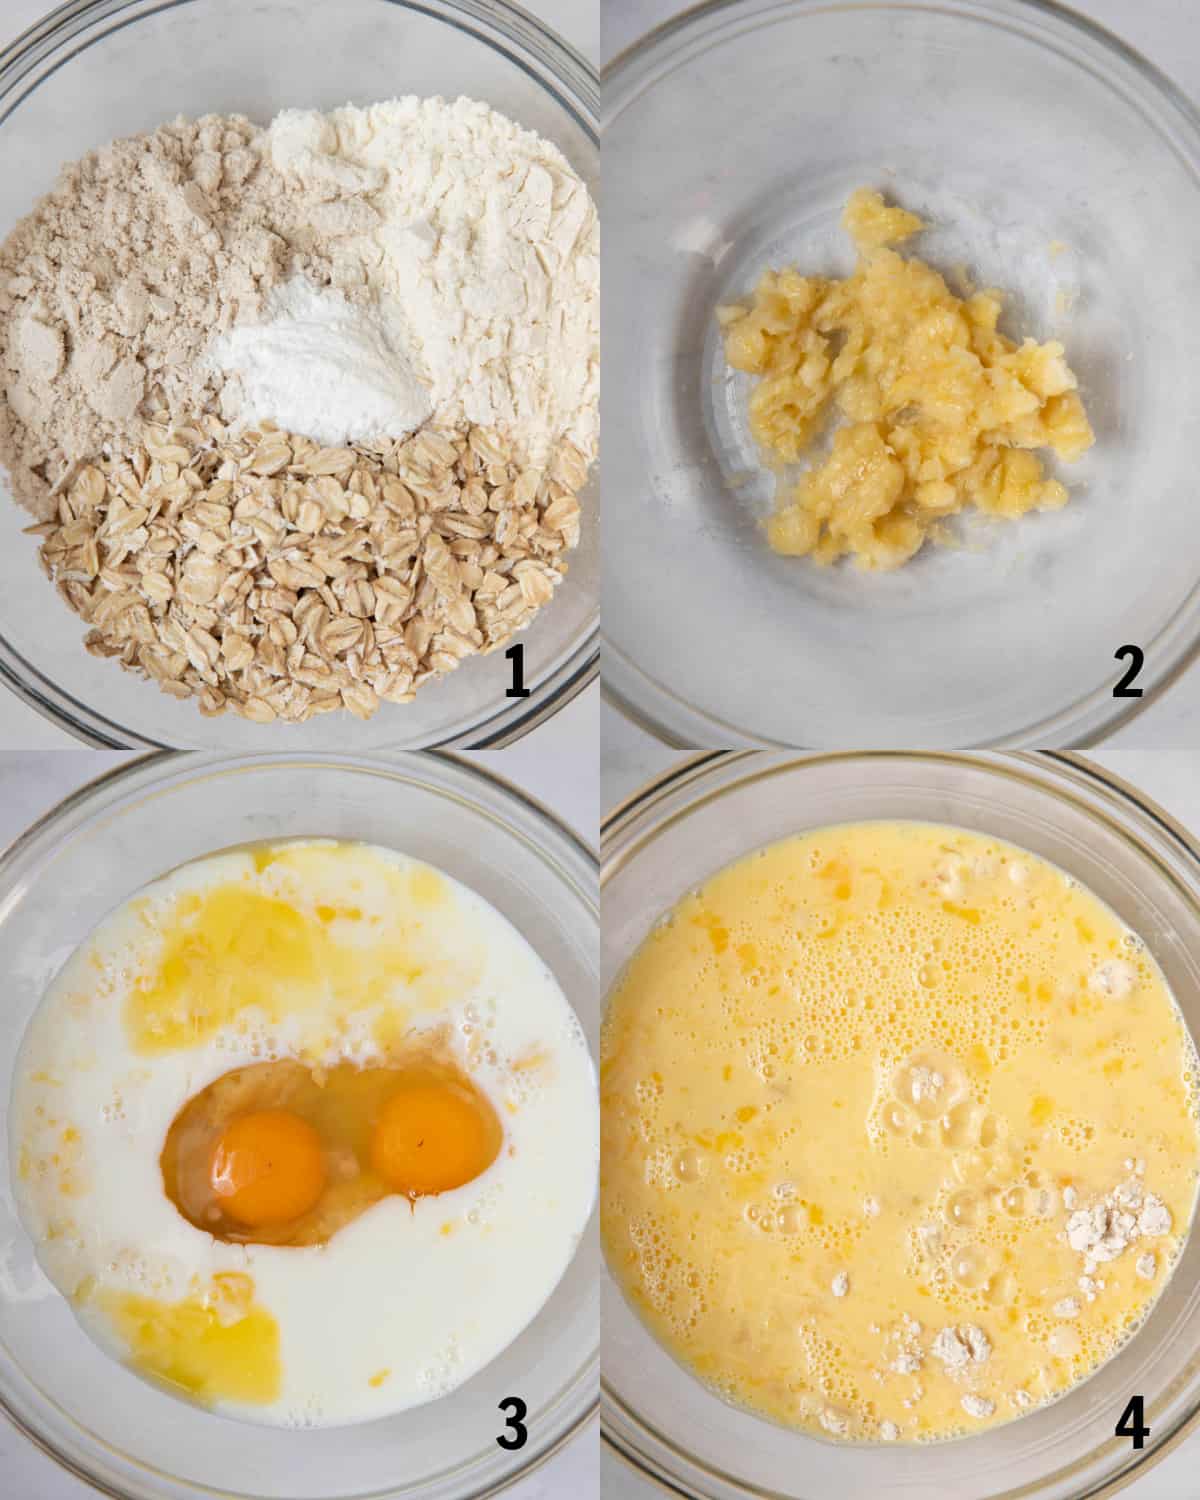 Mixing together the dry ingredients and wet ingredients in a bowl.